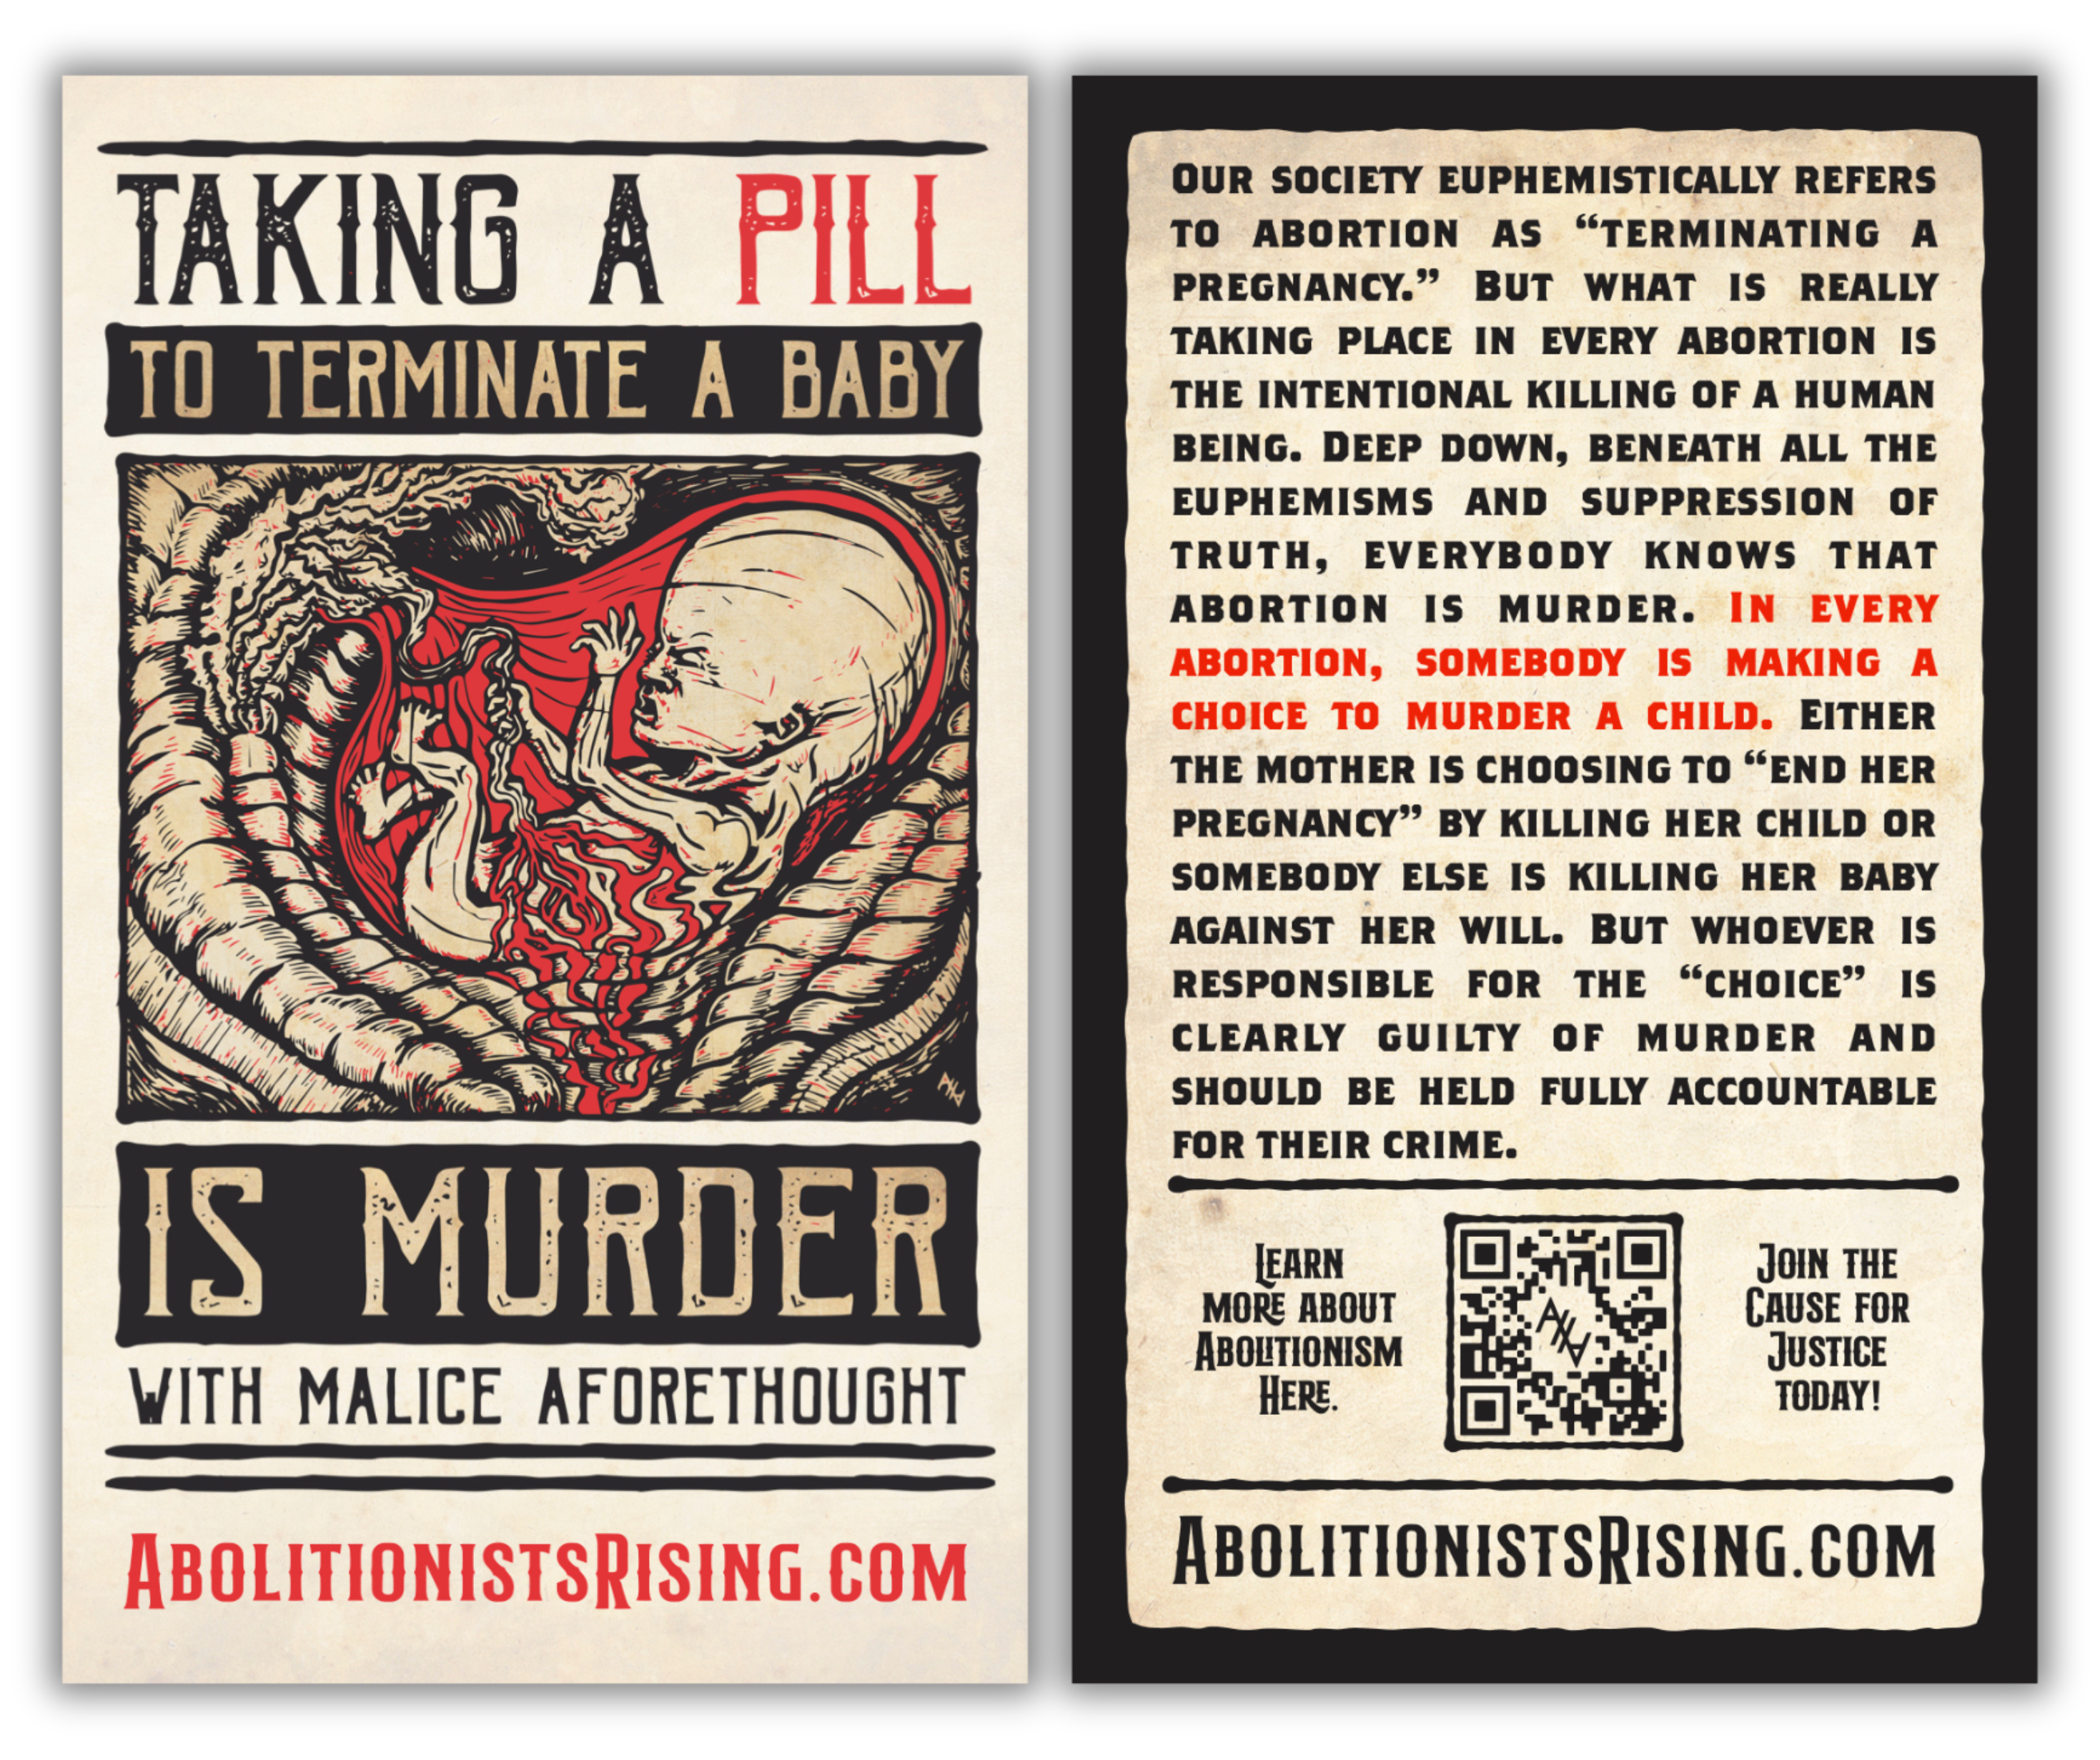 Taking A Pill To Terminate A Baby - Large Dropcard